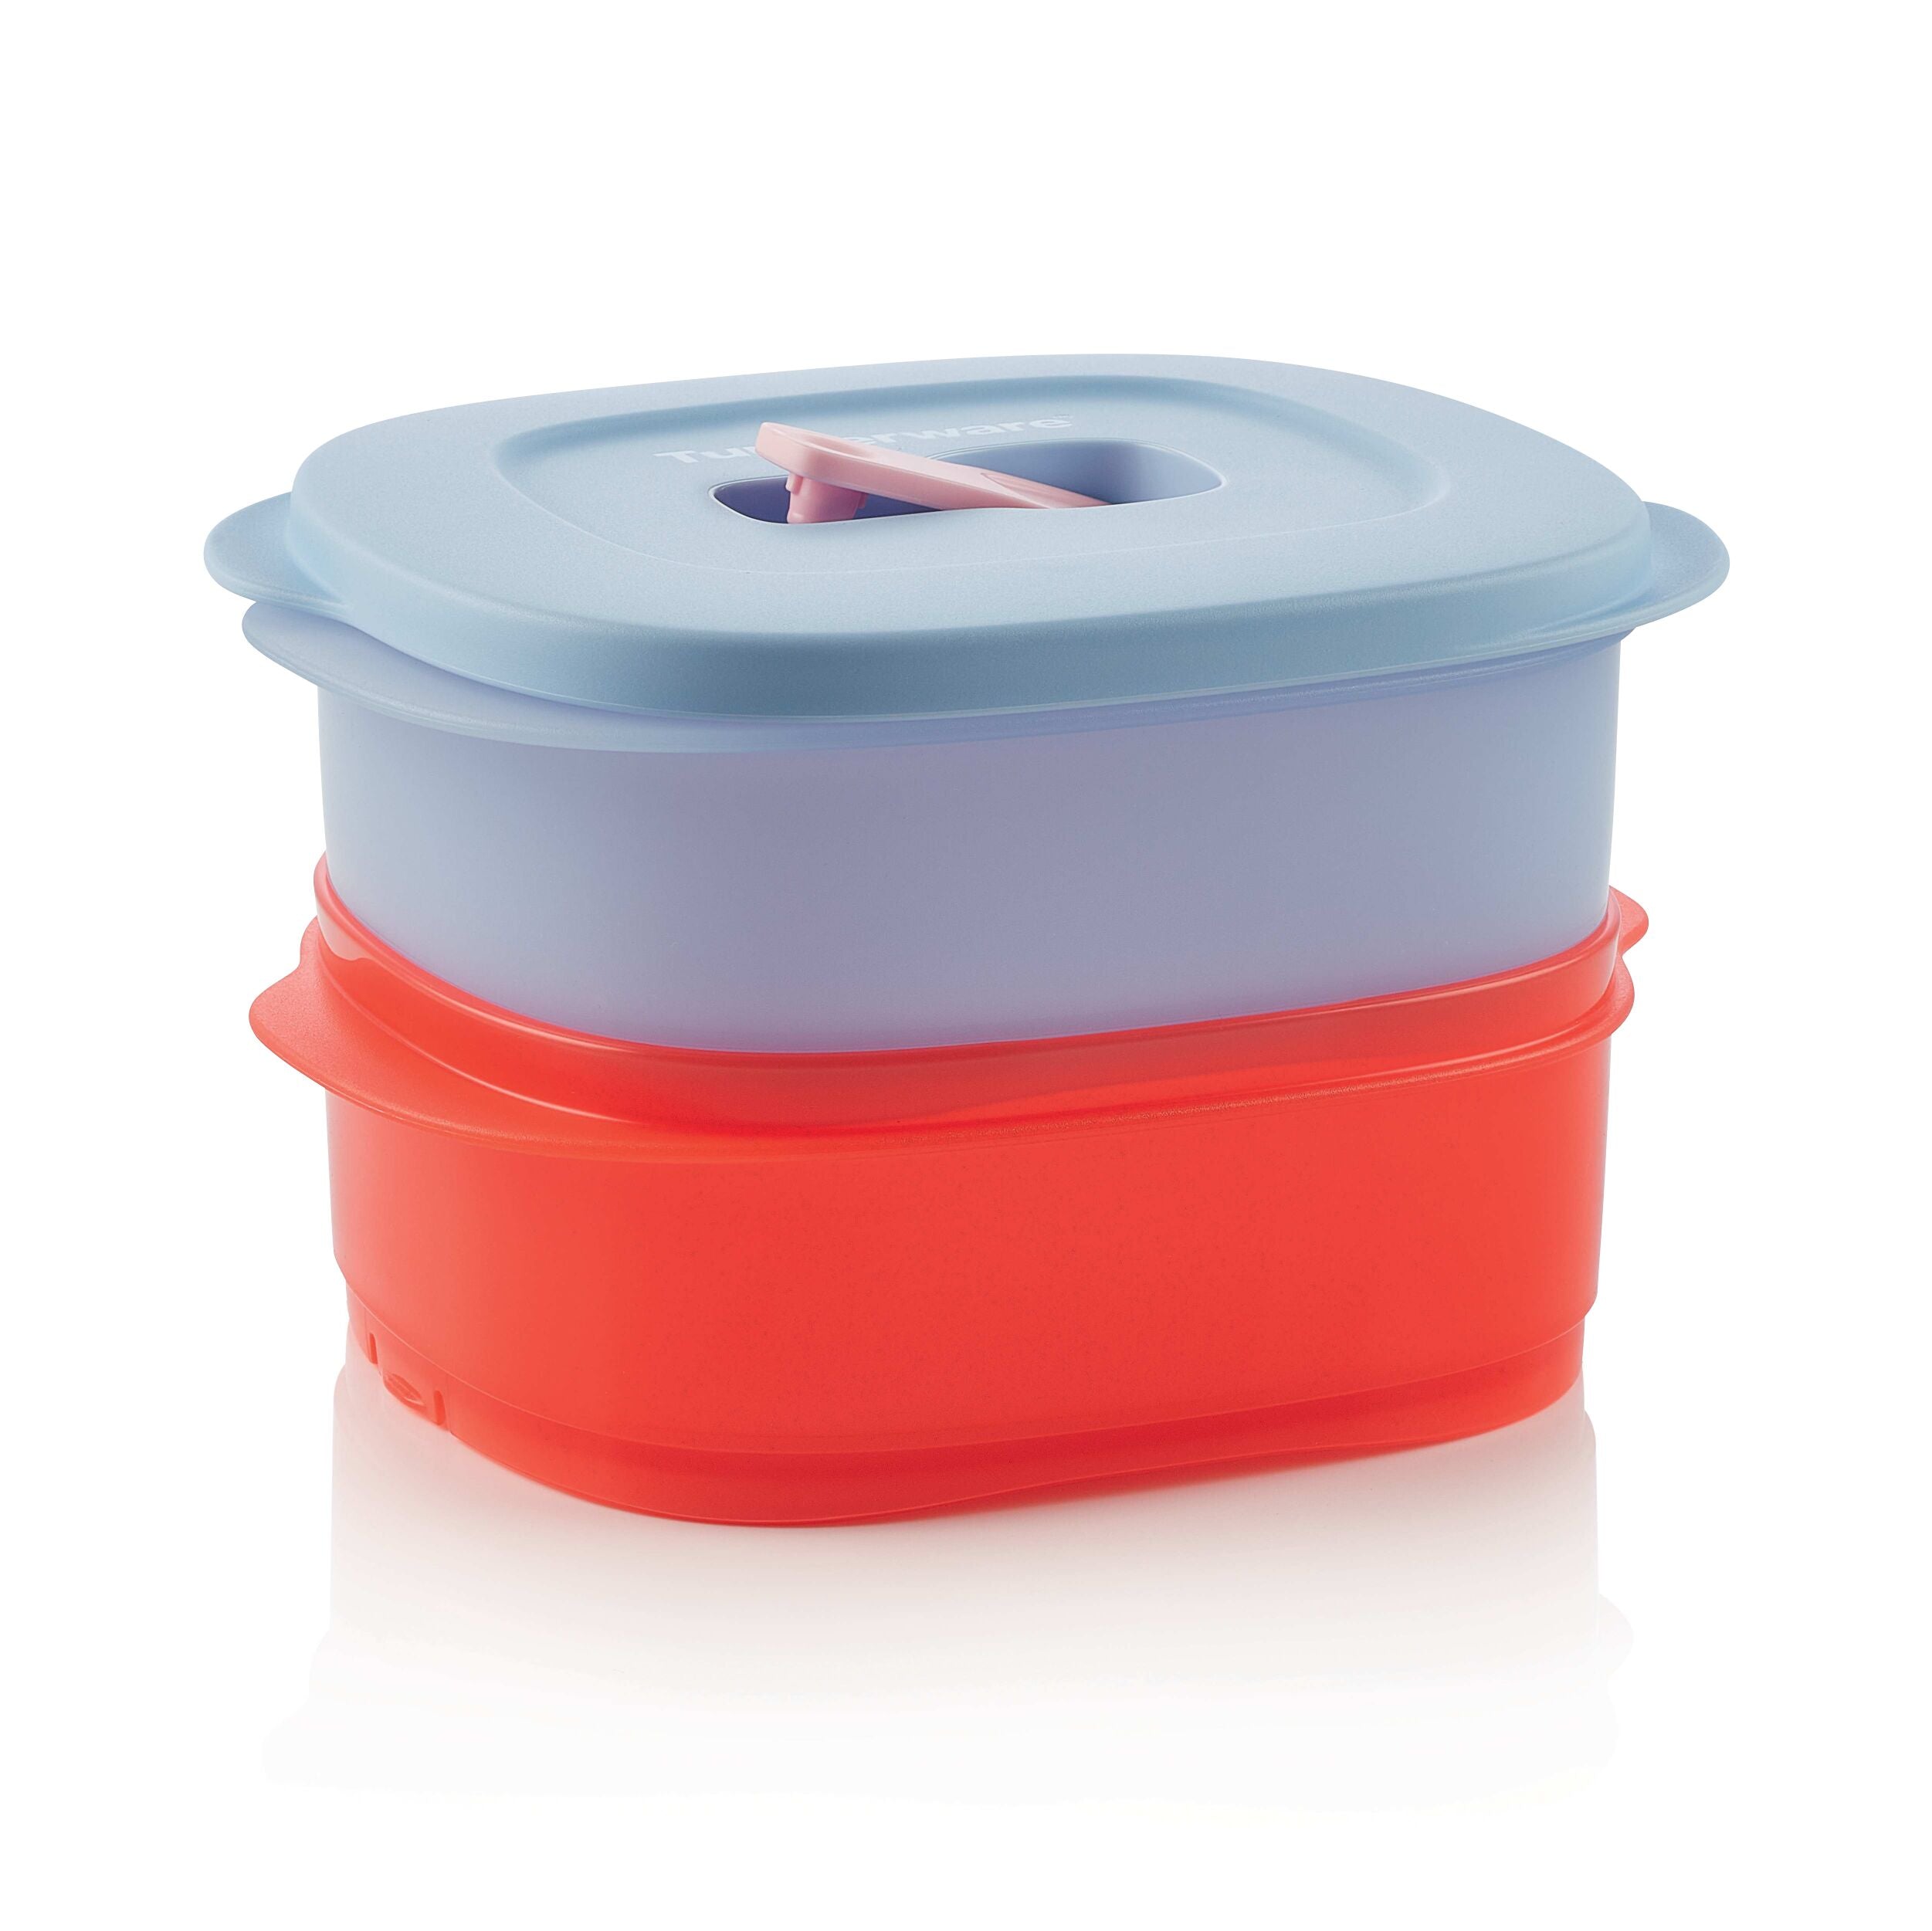 Microwave Container 500 ml (2)